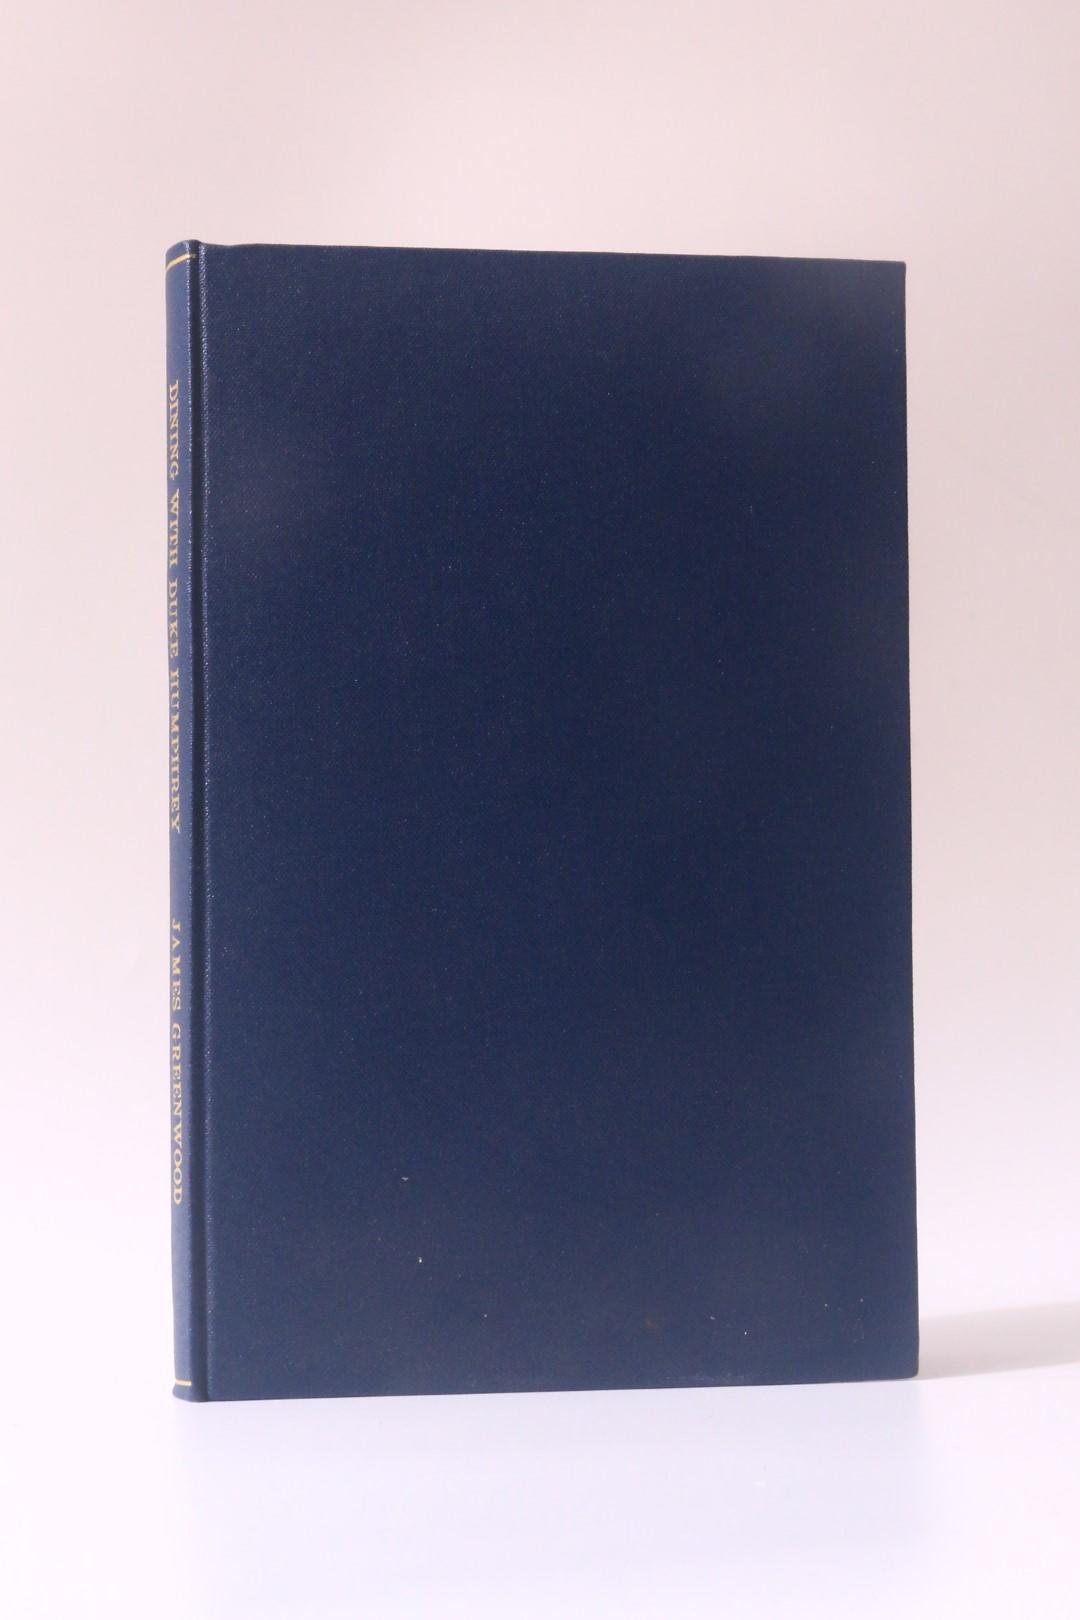 James Greenwood - Dining with Duke Humphrey - Warne, n.d. [1880s?], First Edition.